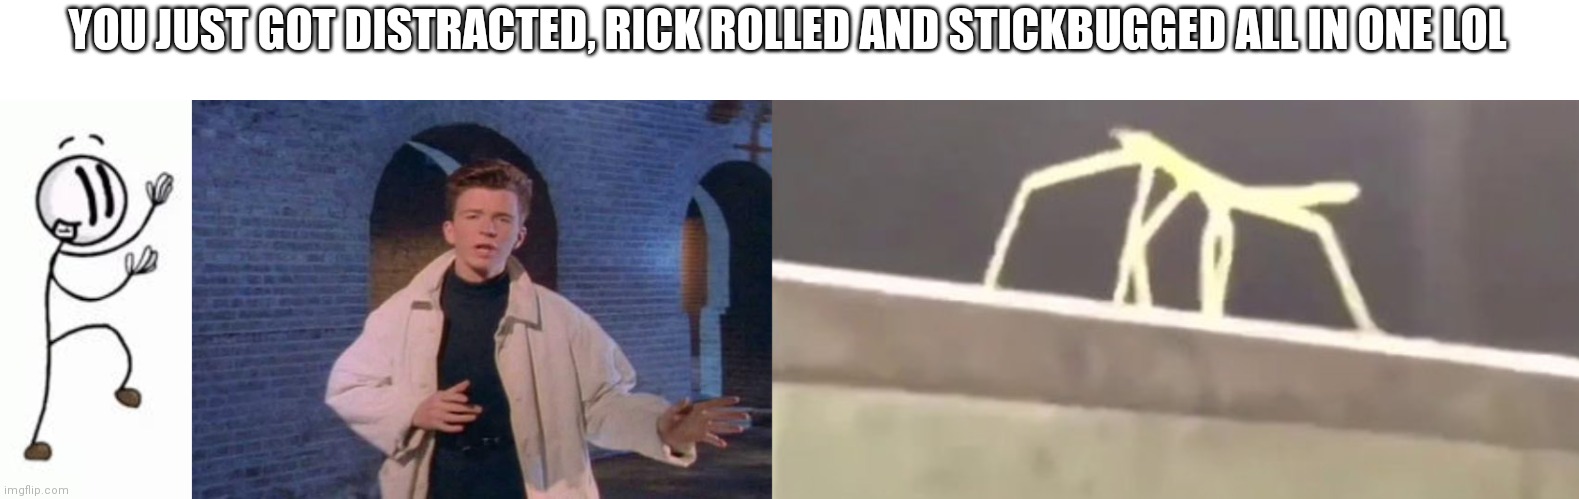 Lol | YOU JUST GOT DISTRACTED, RICK ROLLED AND STICKBUGGED ALL IN ONE LOL | image tagged in distraction dance,rick rolled,get stick bugged lol | made w/ Imgflip meme maker